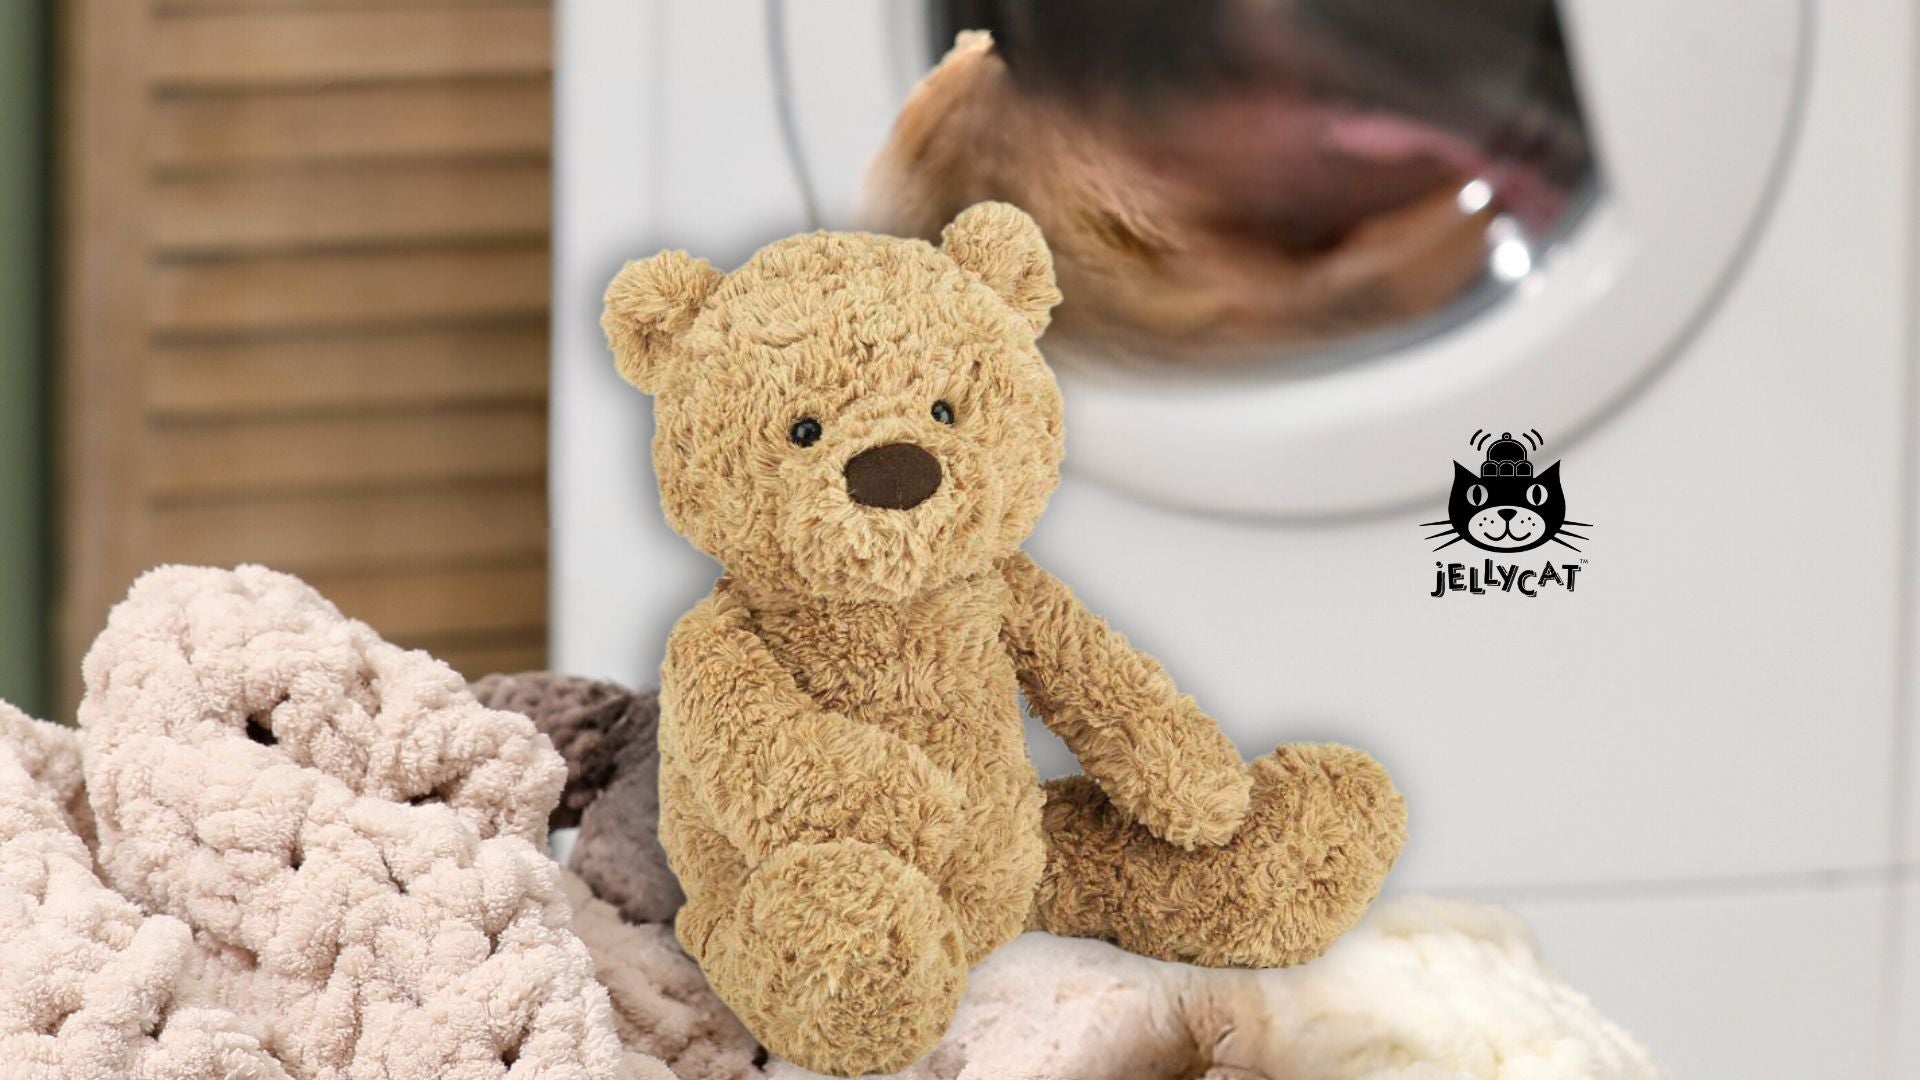 How to Clean Stuffed Animals and Remove Germs